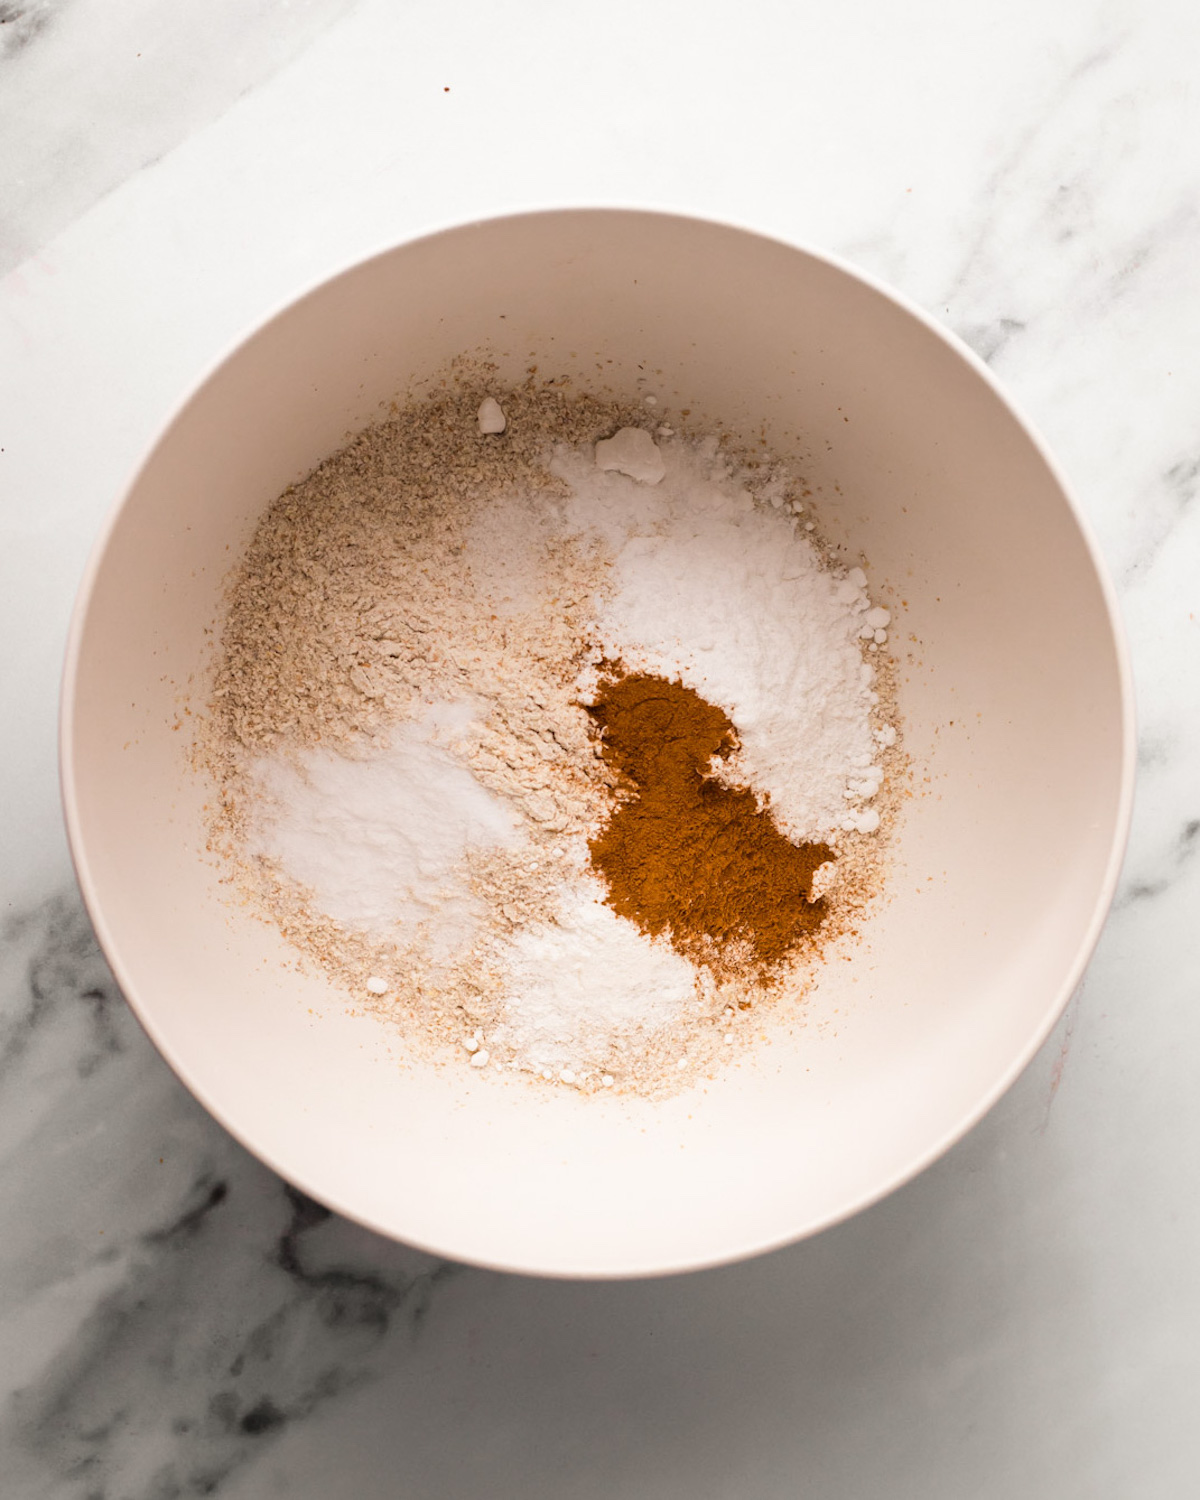 An overhead shot of a bowl of flour, spices, and salt.